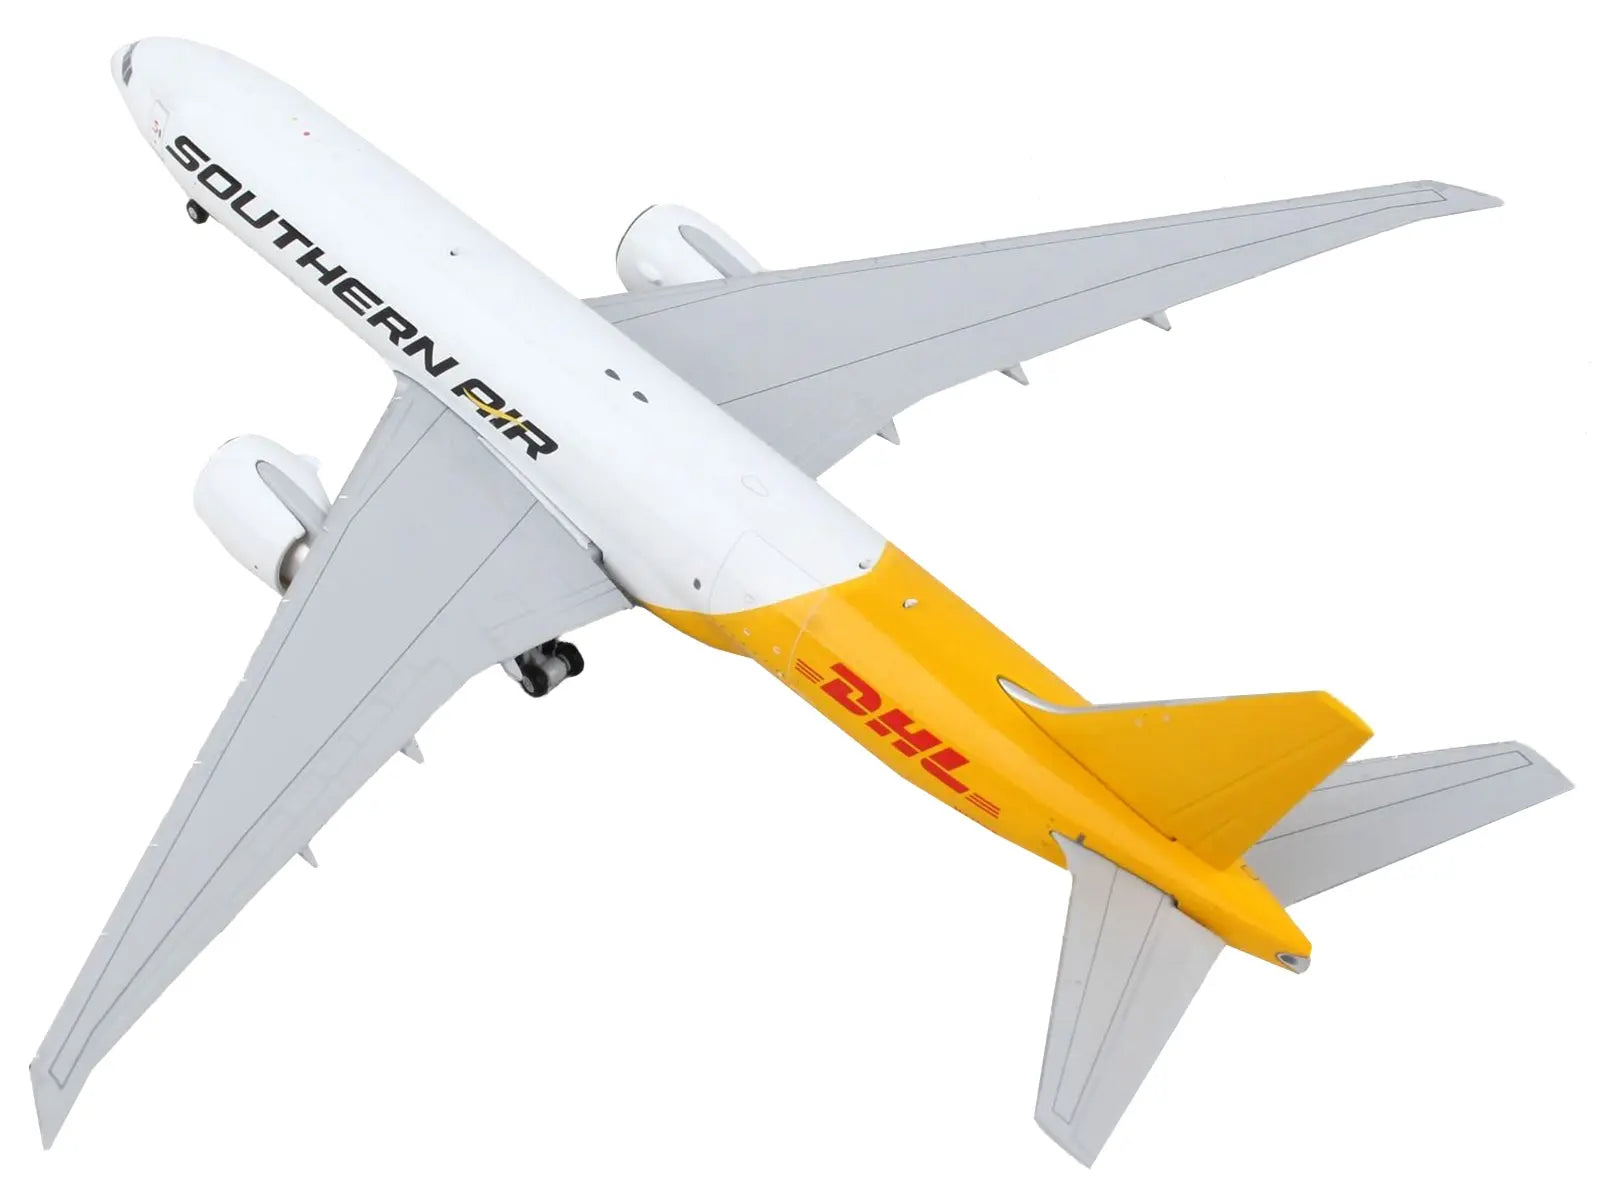 Boeing 777F Commercial Aircraft "Southern Air - DHL" White and Yellow 1/400 Diecast Model Airplane by GeminiJets GeminiJets